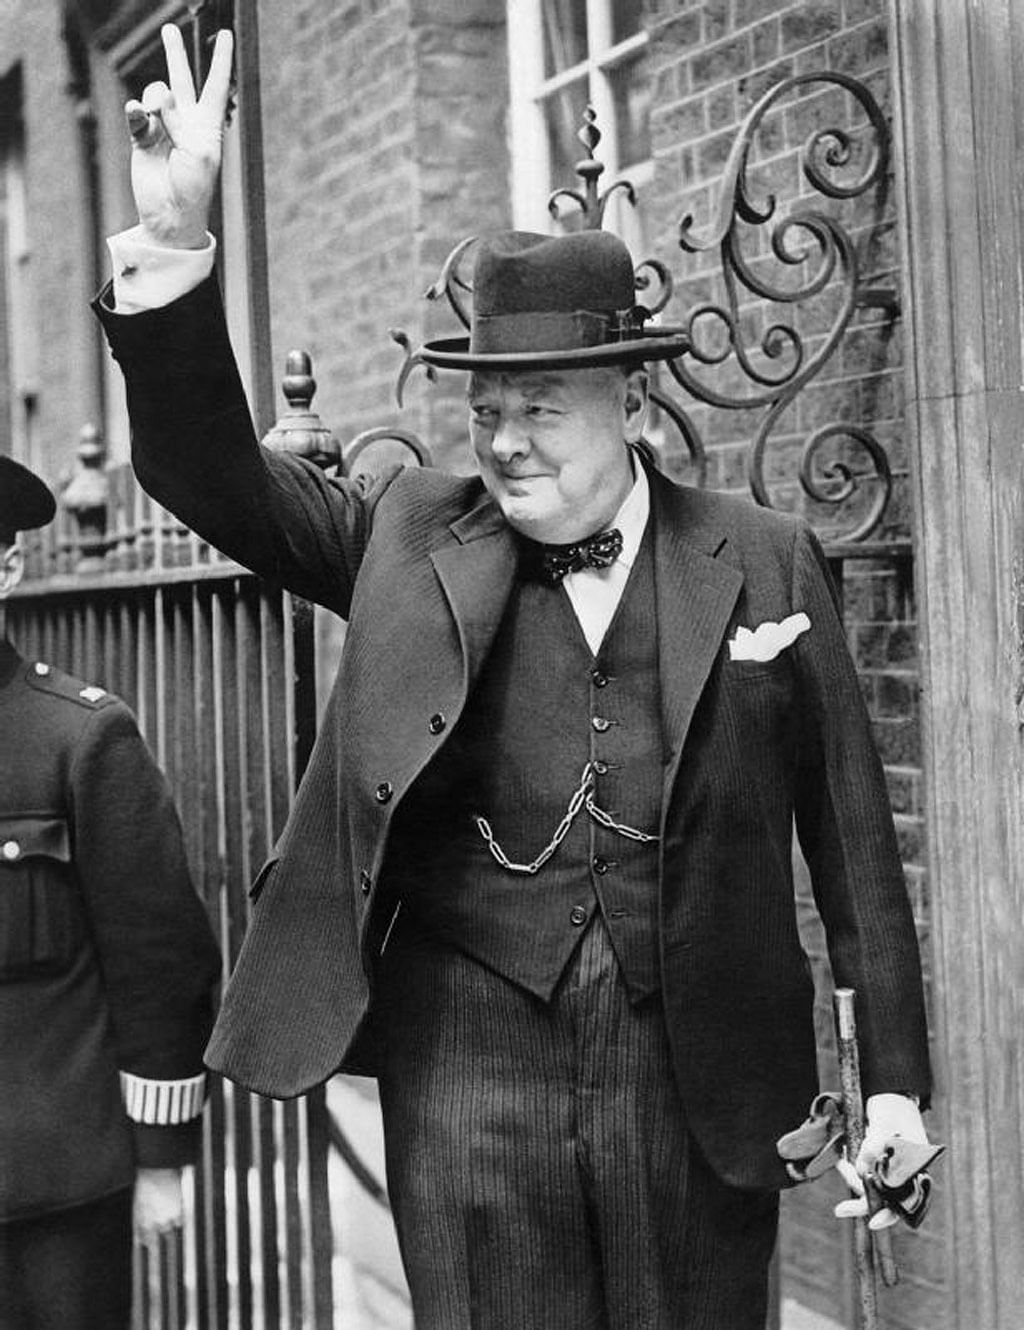 Did Churchill detest India and Gandhi as much as we think?